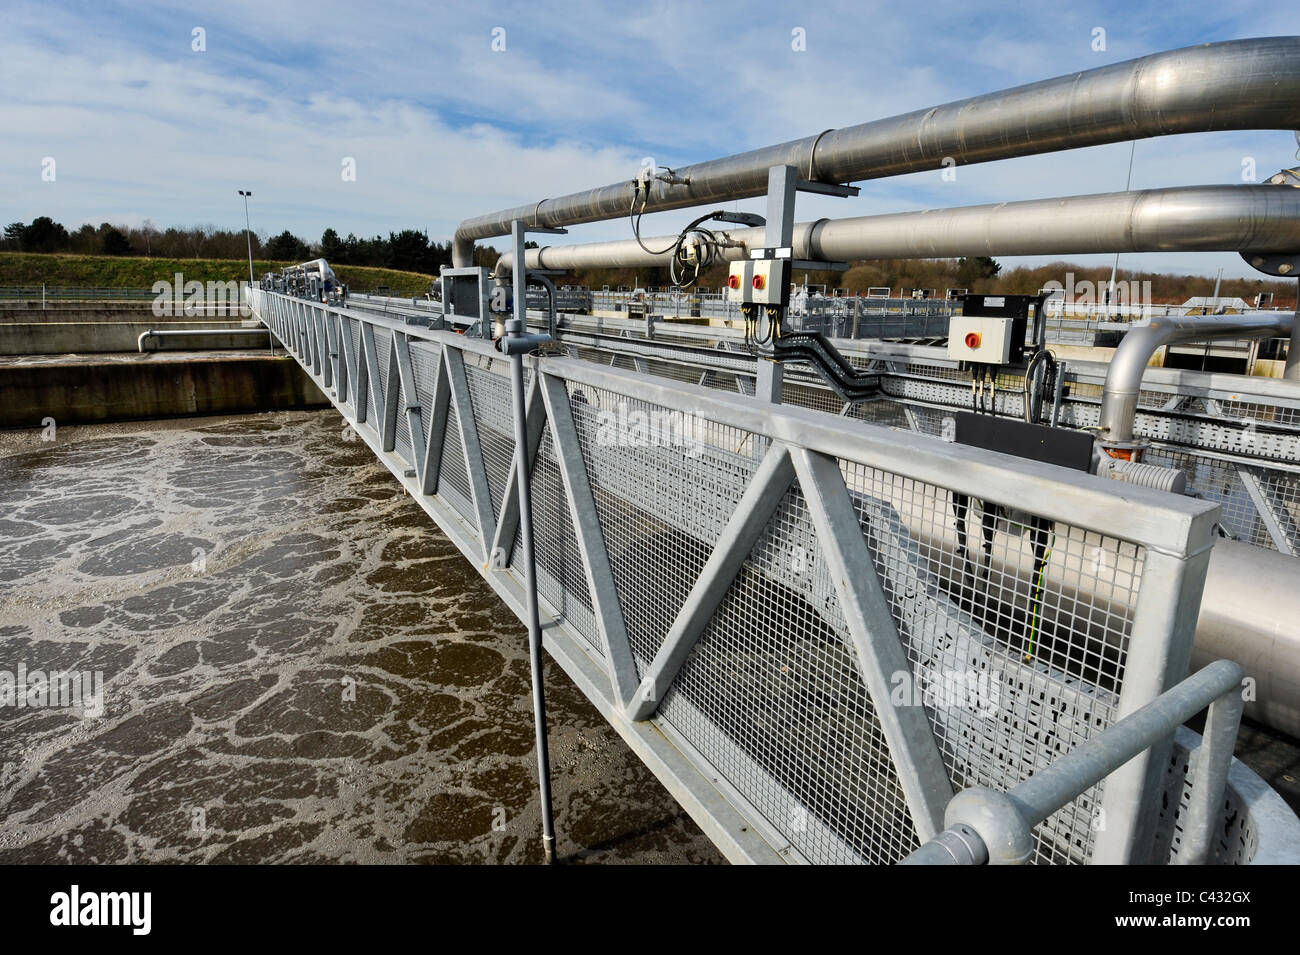 A sewage treatment plant in the South East UK Stock Photo